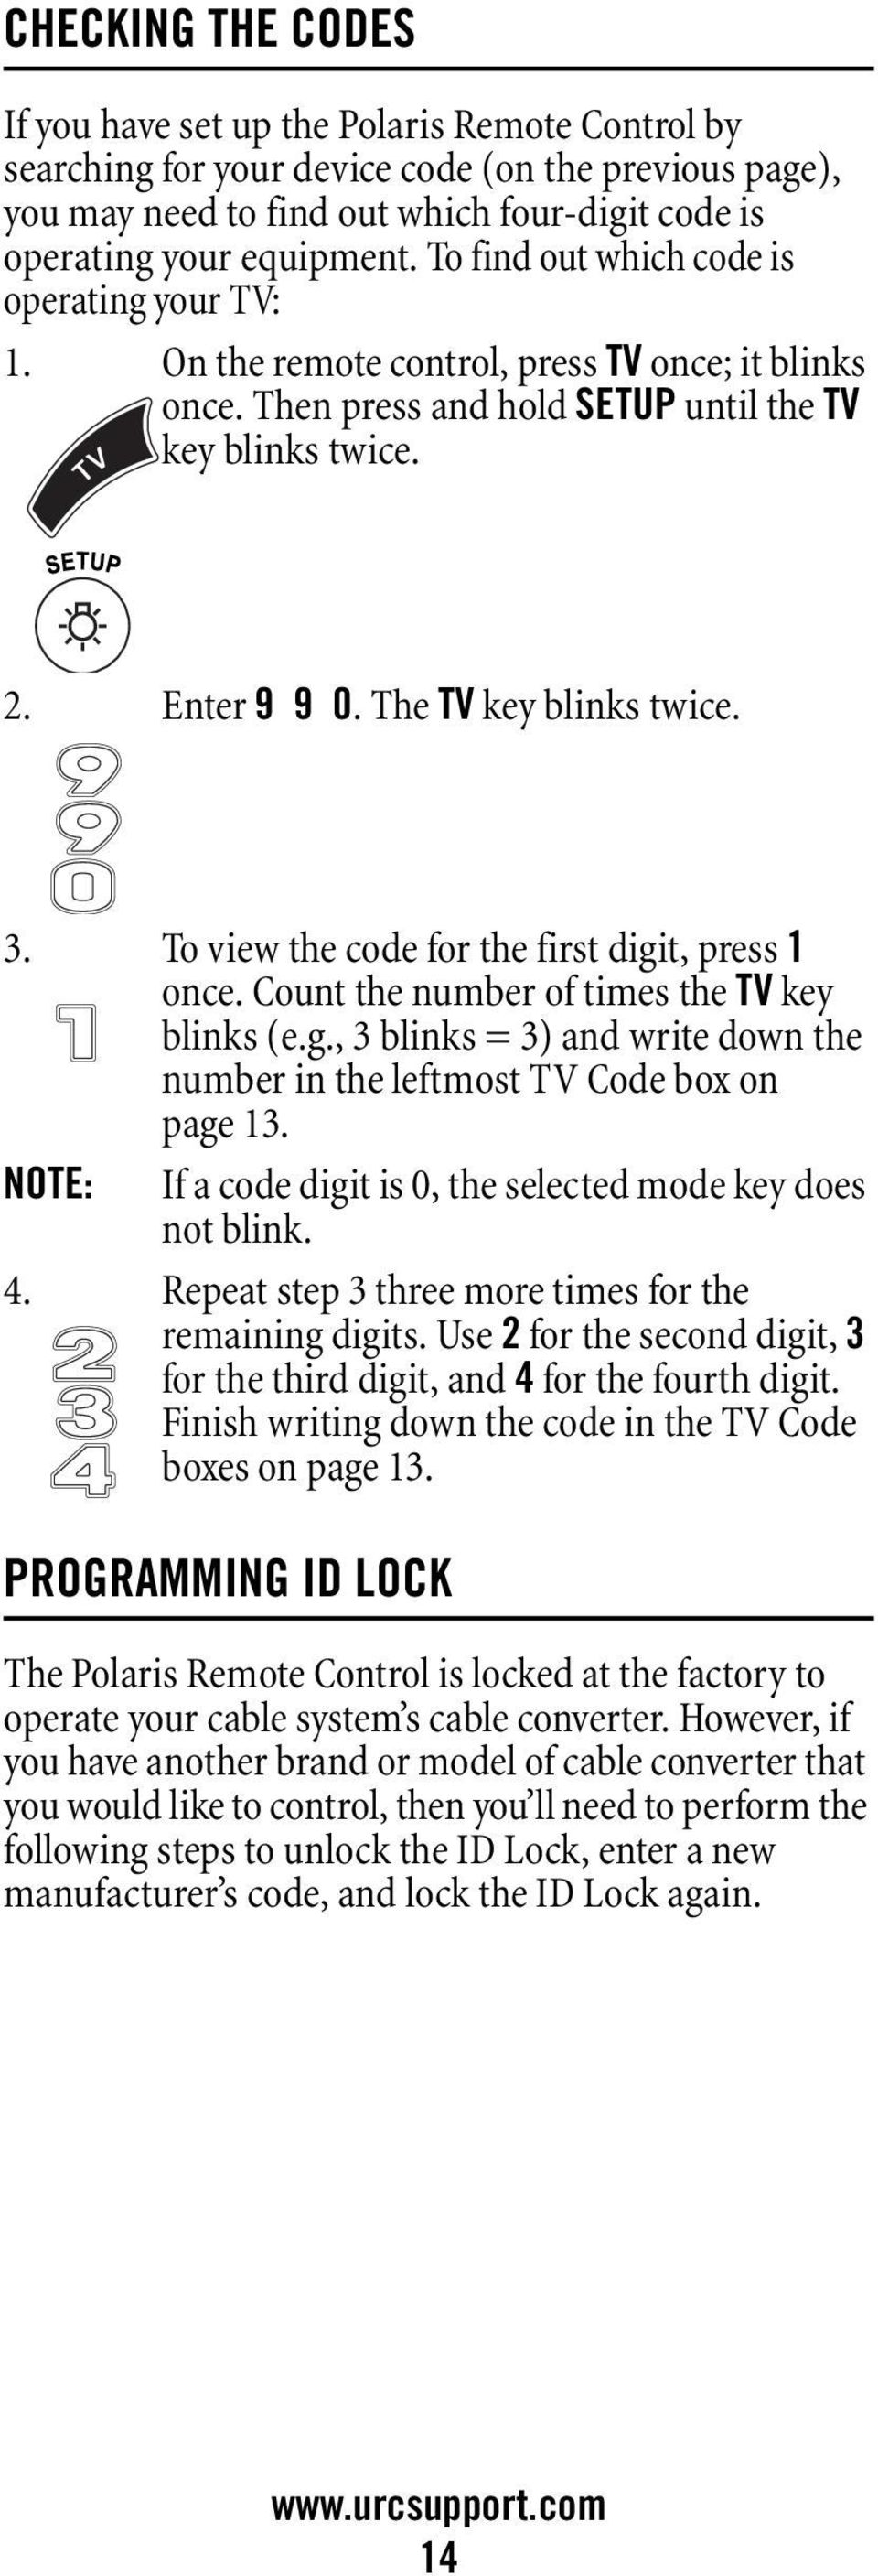 3. To view the code for the first digit, press 1 once. Count the number of times the TV key blinks (e.g., 3 blinks = 3) and write down the number in the leftmost TV Code box on page 13.